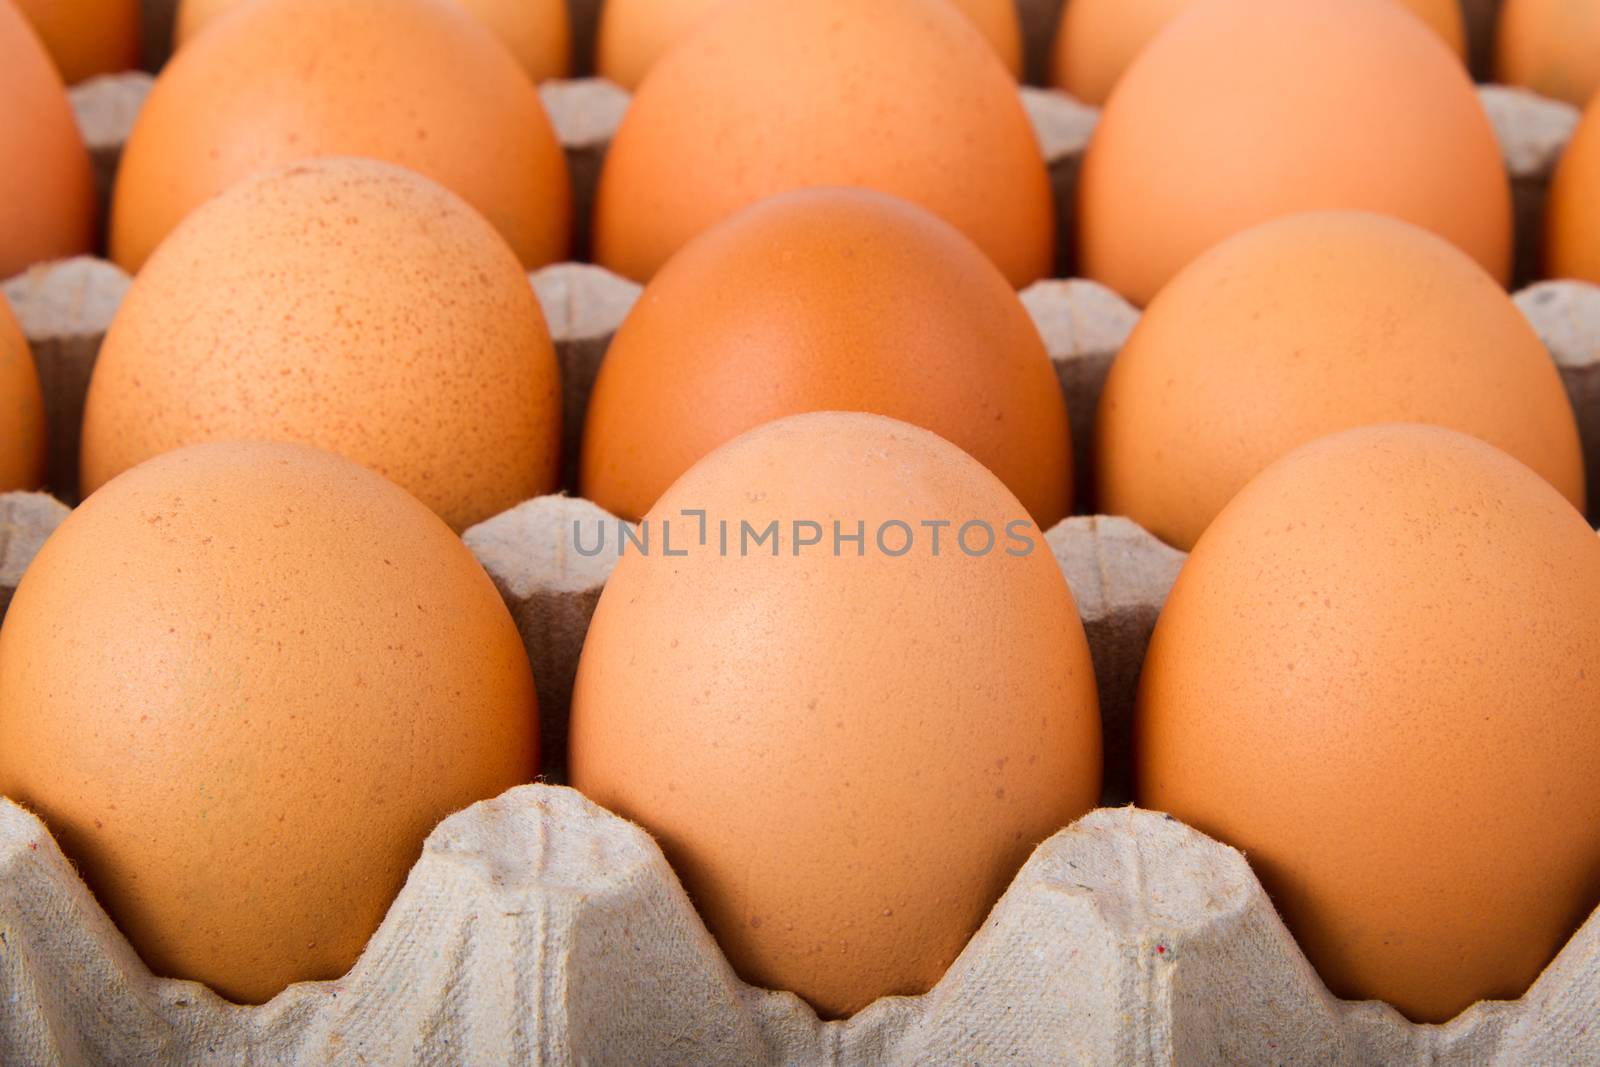 Brown eggs in a carton. Isolated on a white background